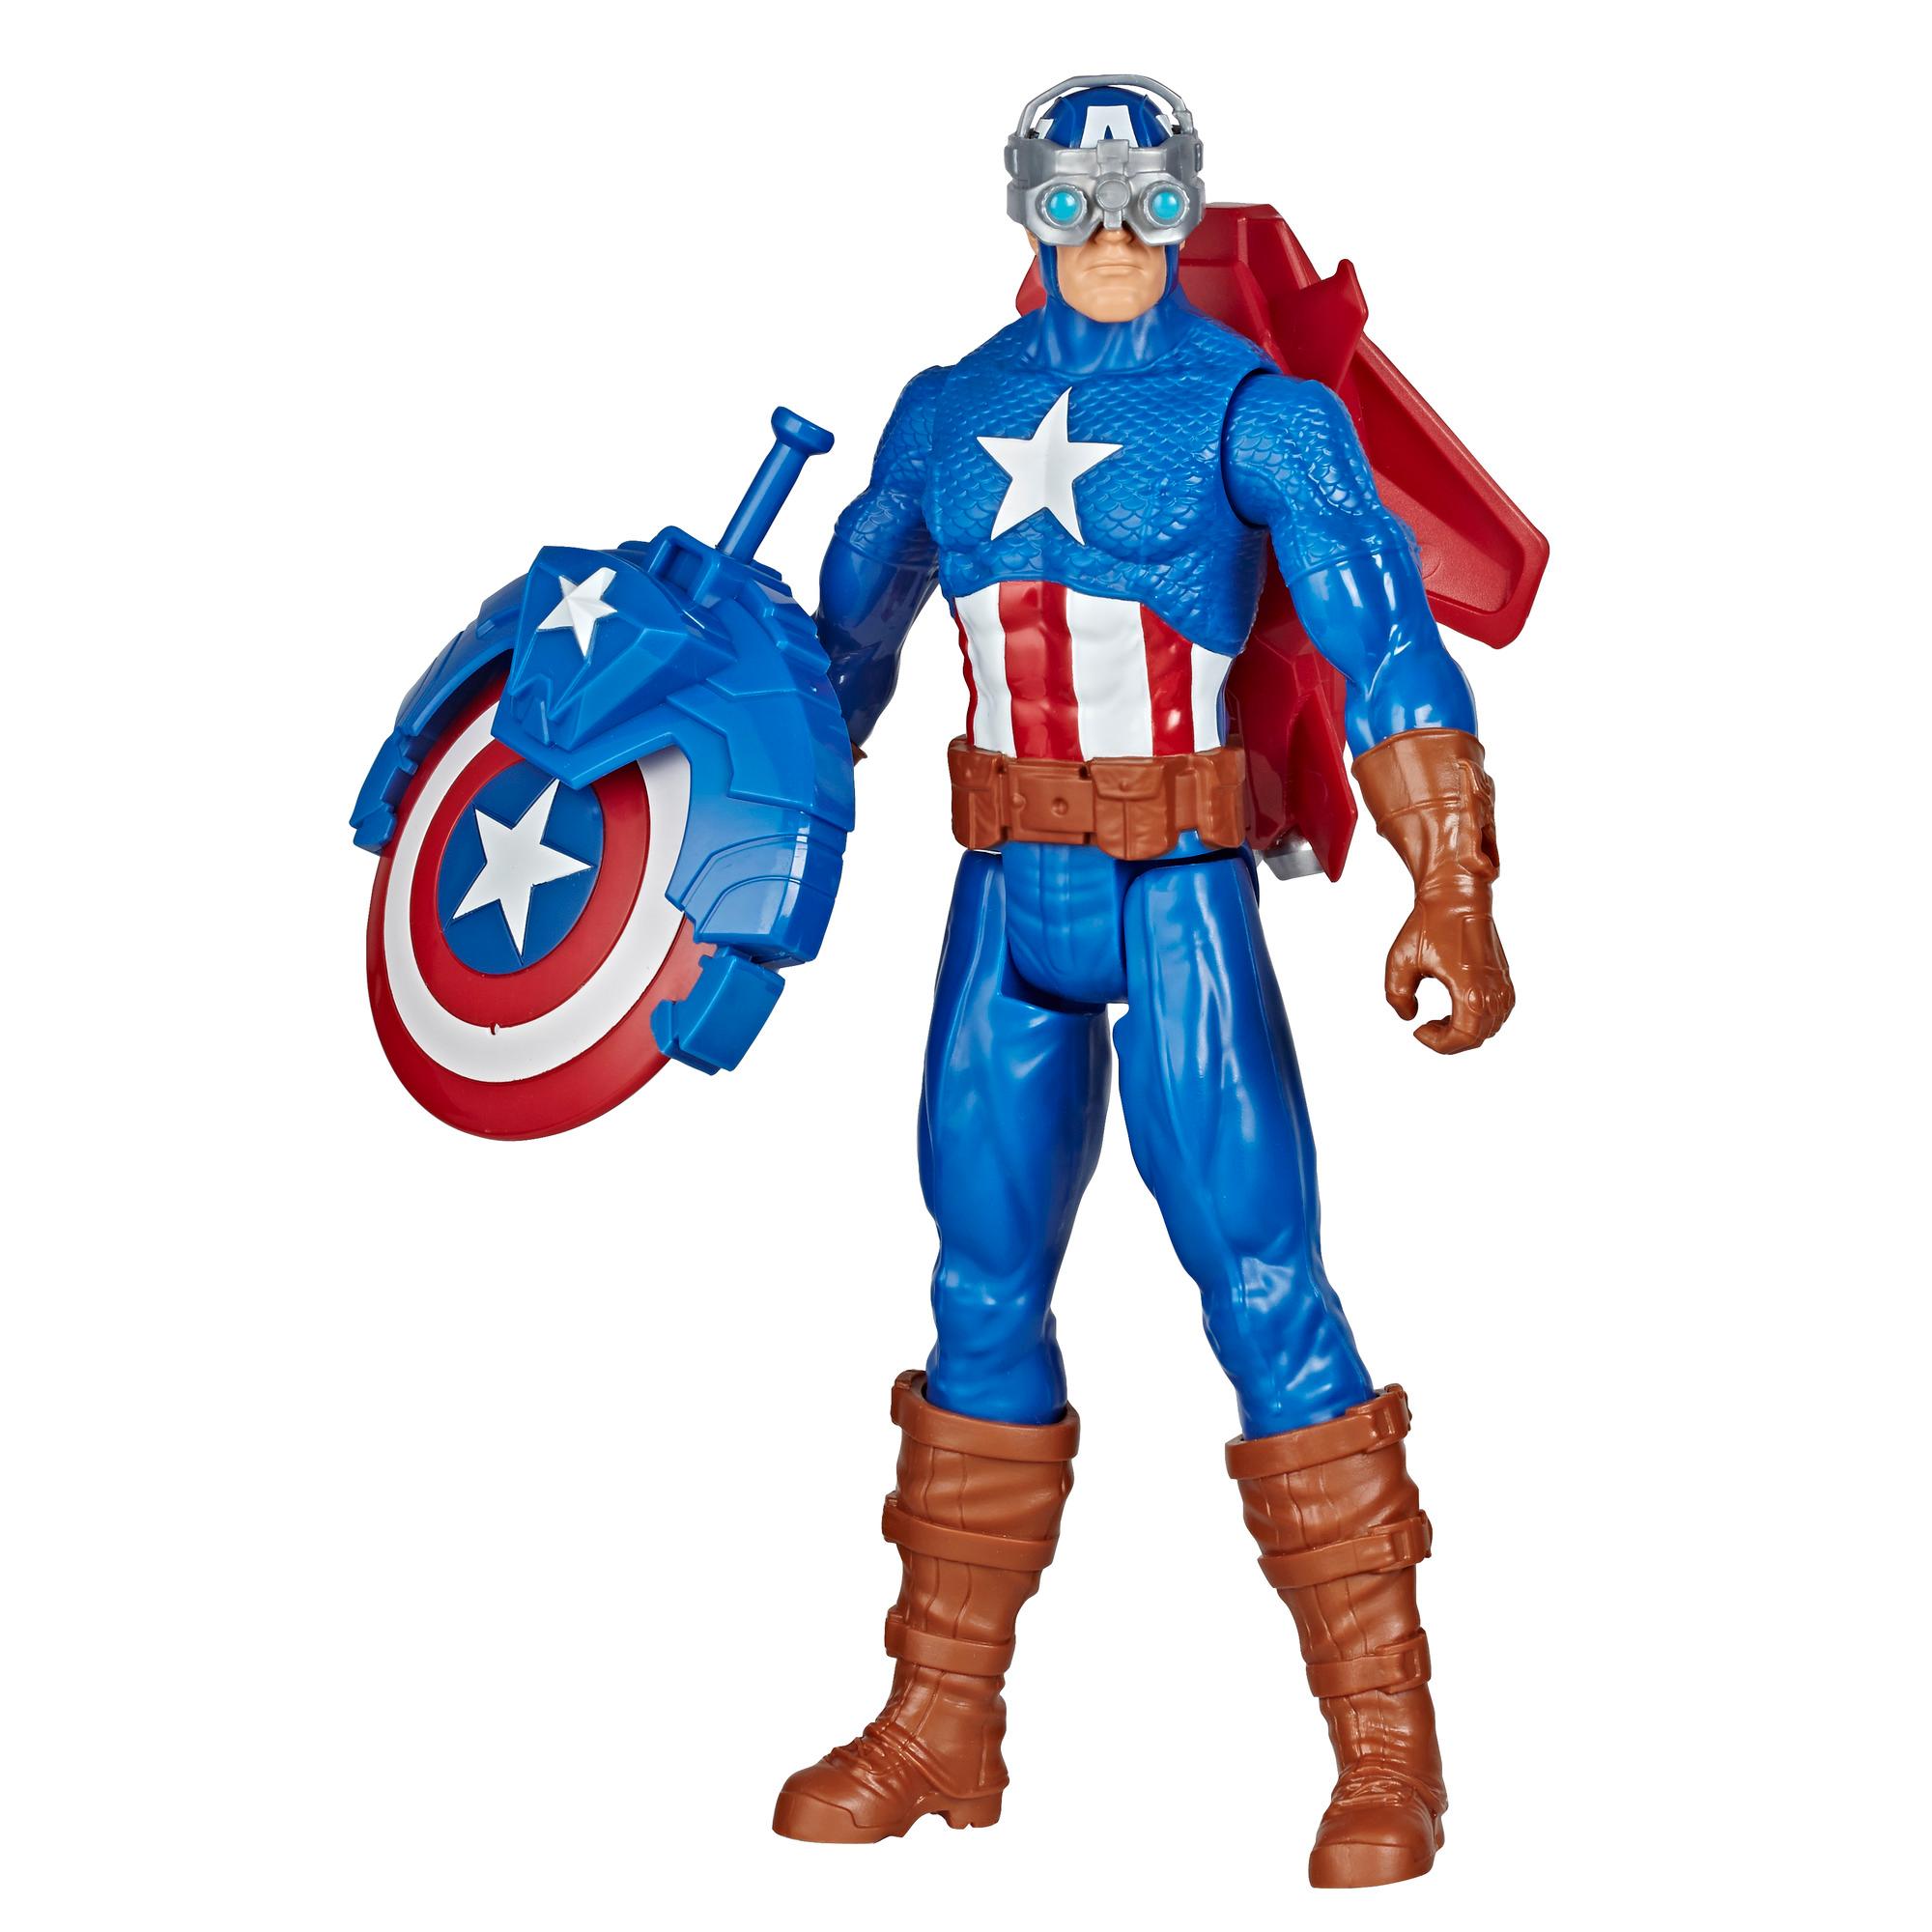 Marvel Avengers Titan Hero Series Blast Gear Captain America, With Launcher, 2 Accessories and Projectile, Ages 4 And Up